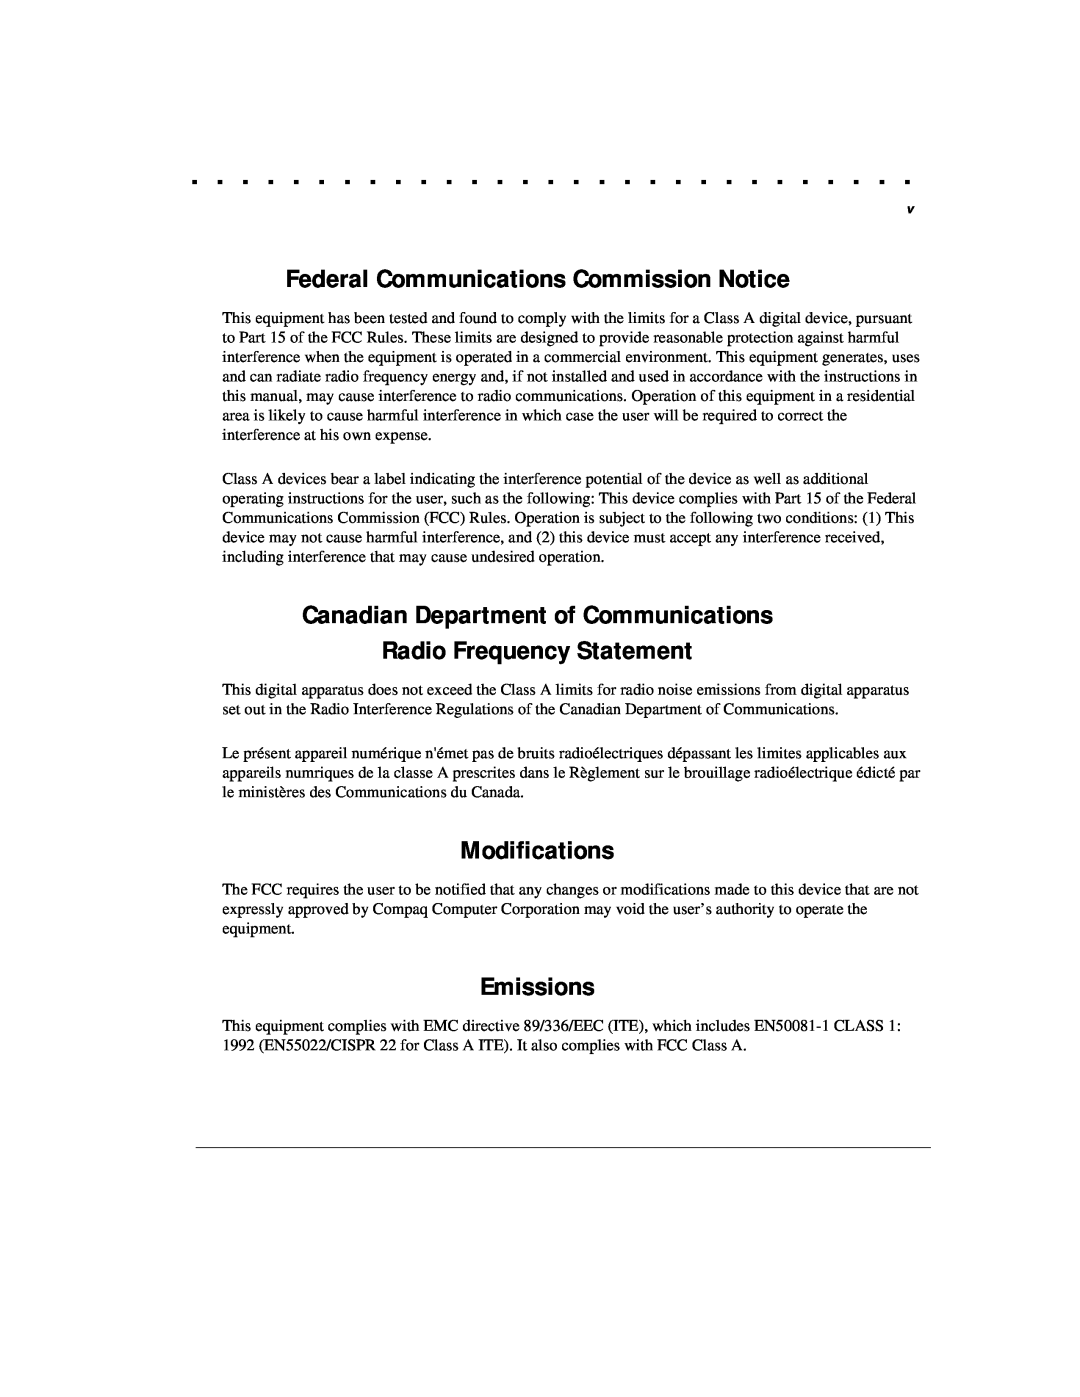 Compaq 1124 Federal Communications Commission Notice, Canadian Department of Communications Radio Frequency Statement 